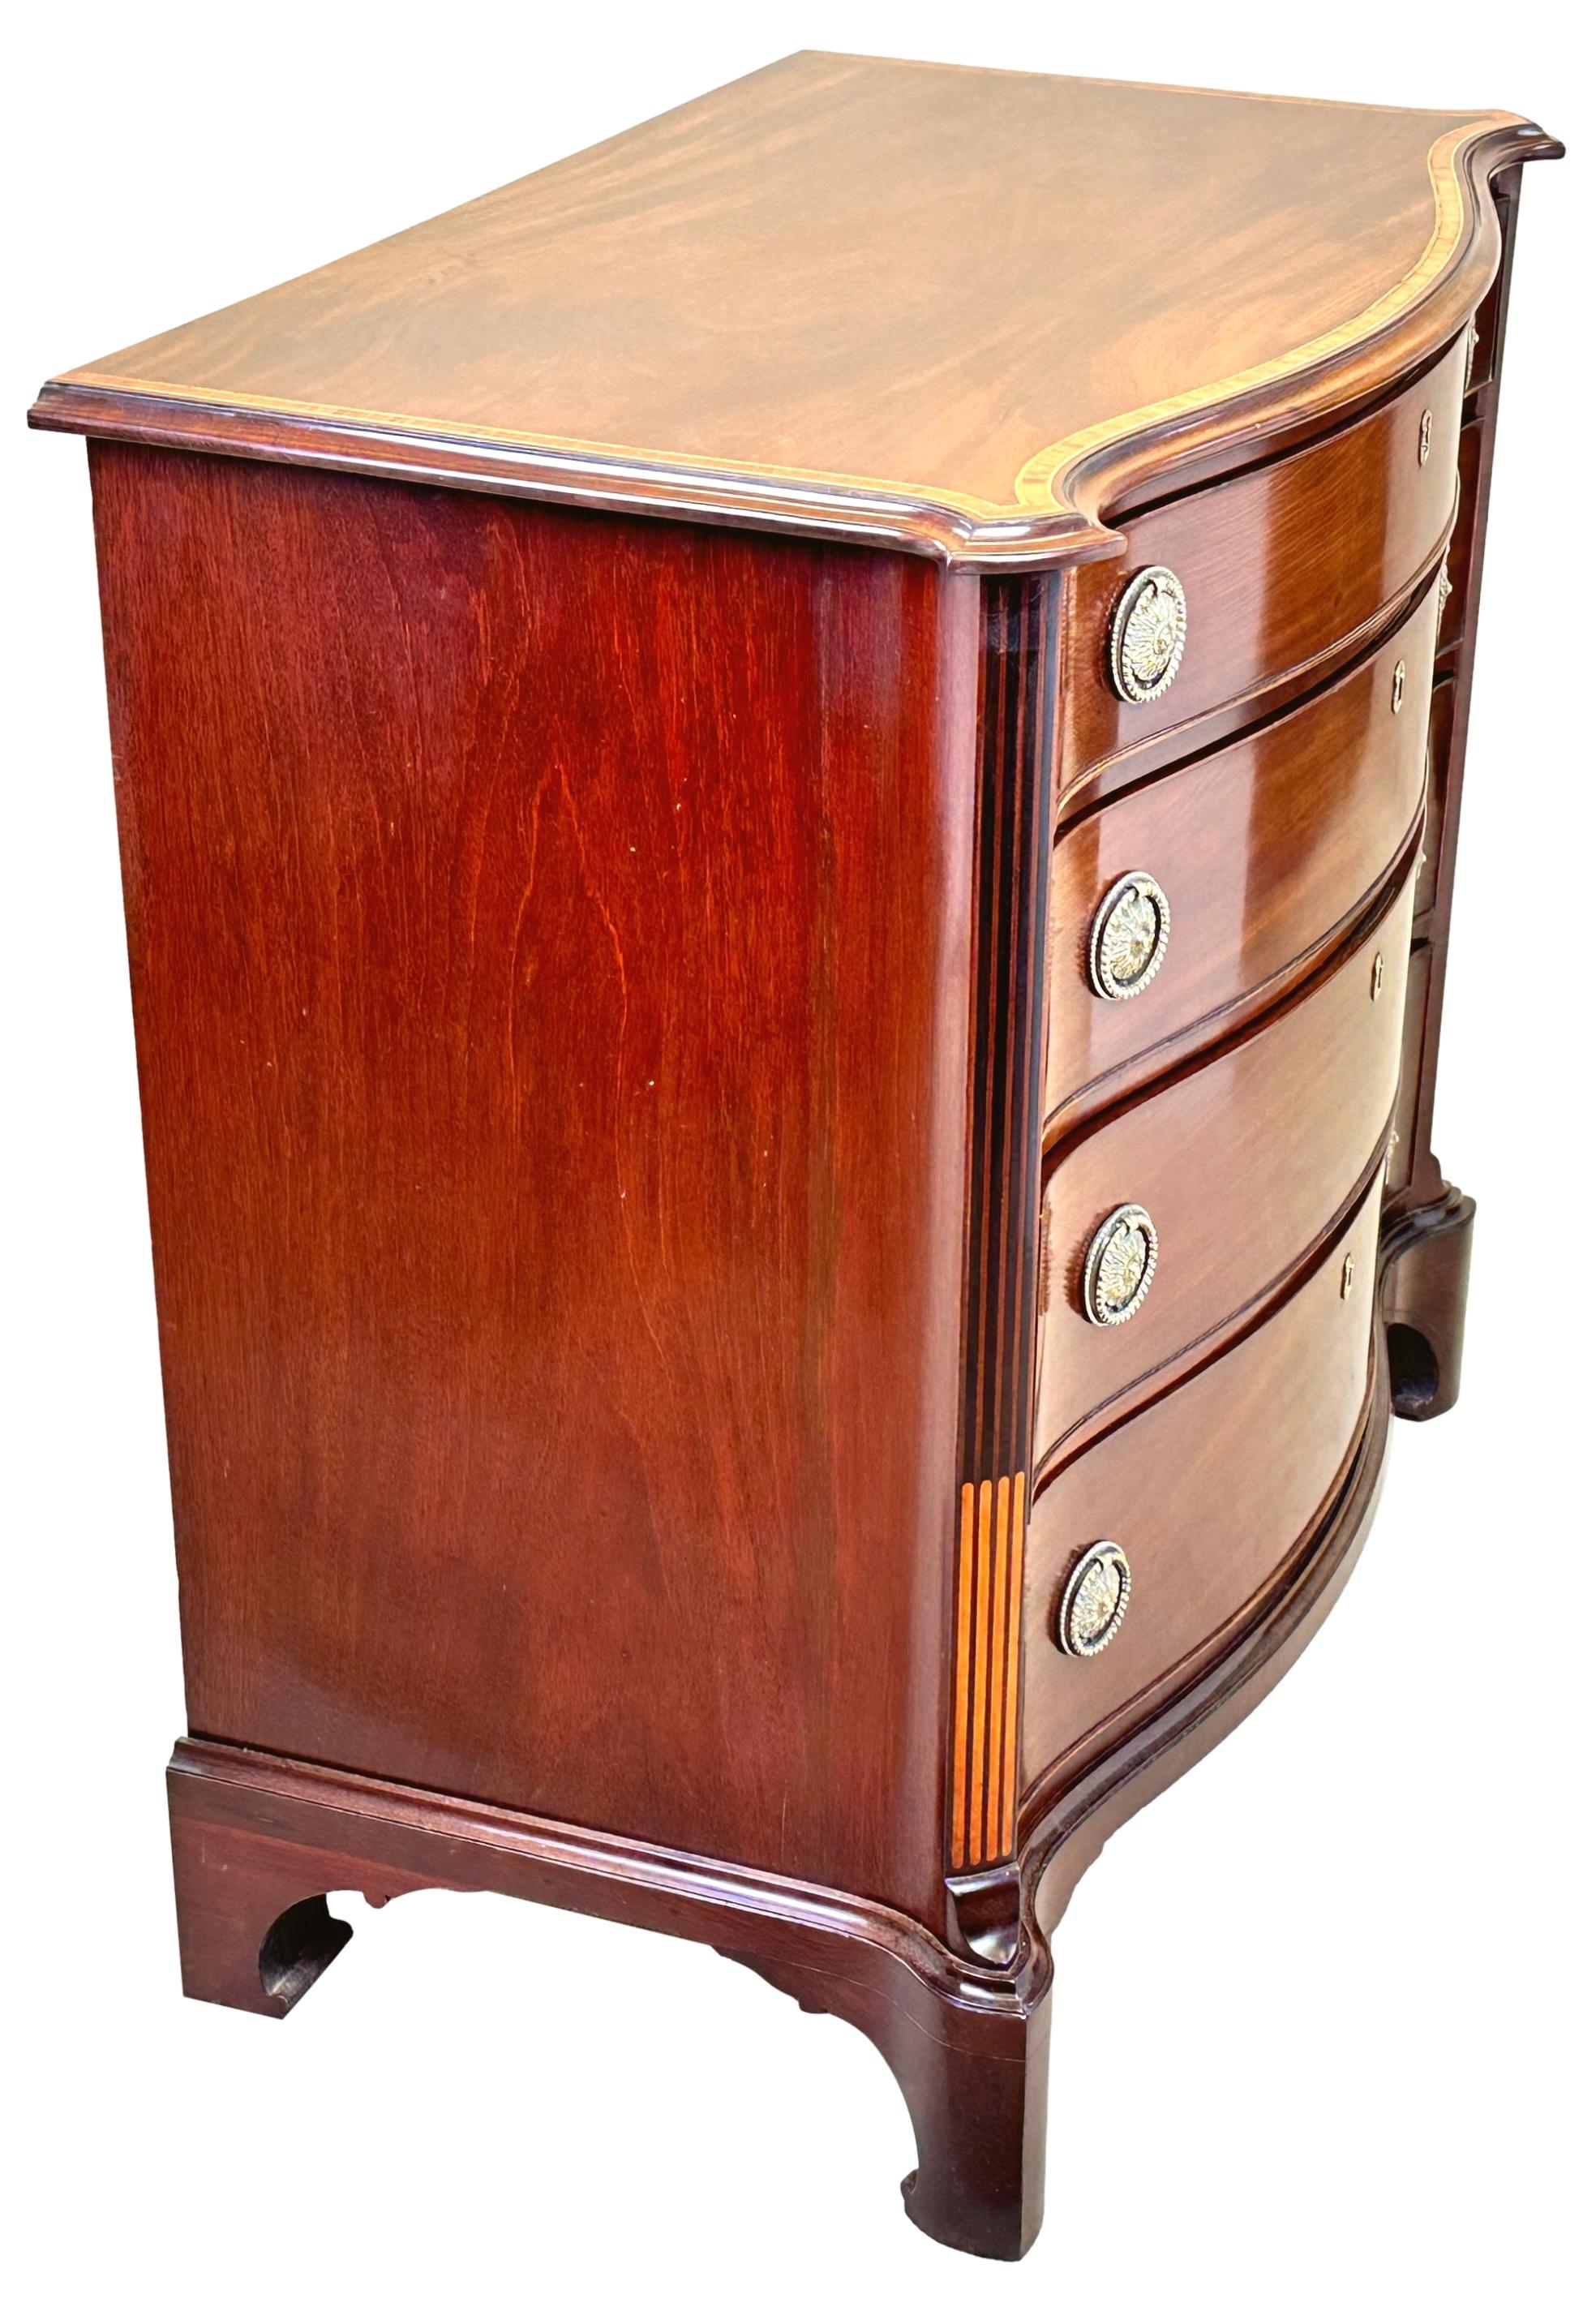 A Delightful And Extremely Good Quality, 18th Century, Georgian Mahogany Serpentine Chest Of Channel Islands Design, Having Superbly Figured Top With Crossbanded Decoration, Over Four Long Drawers With Replacement Brass Handles, Flanked By Canted